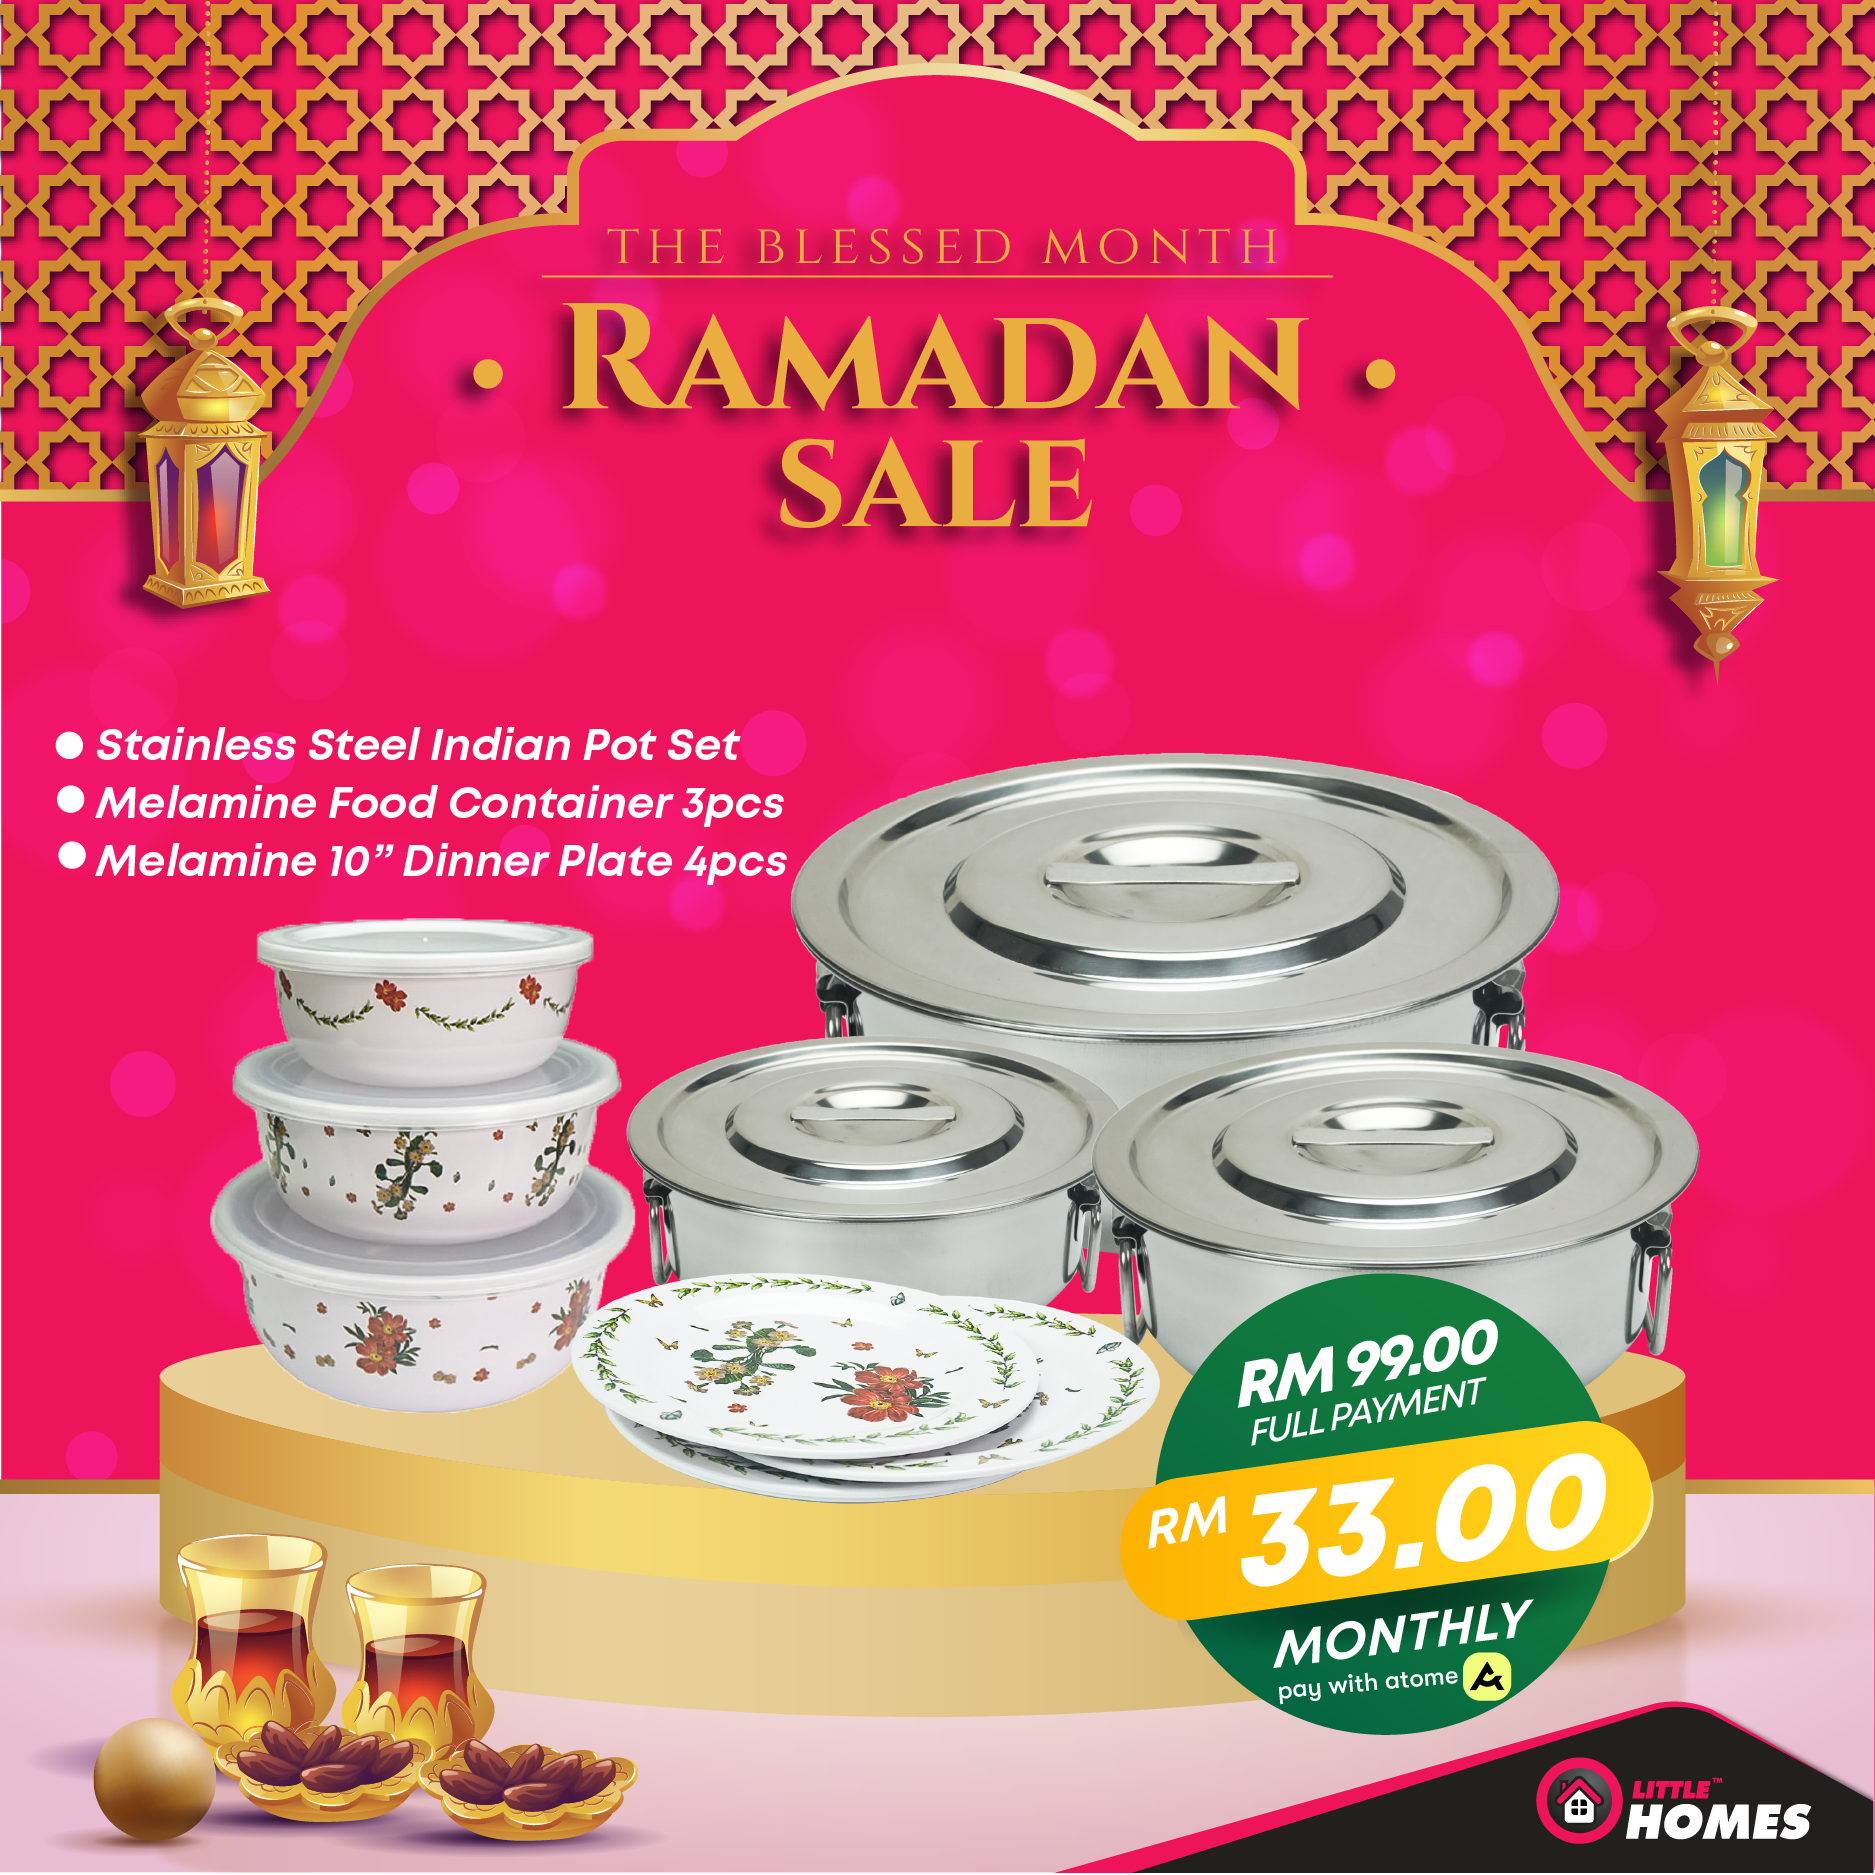 Little Homes Stainless Steel Indian Pot Set with Free Gift #HomeyRaya23 Ramadan Bundle Sale RM99.00 *Available for RM33.00 of 3payments with Atome*